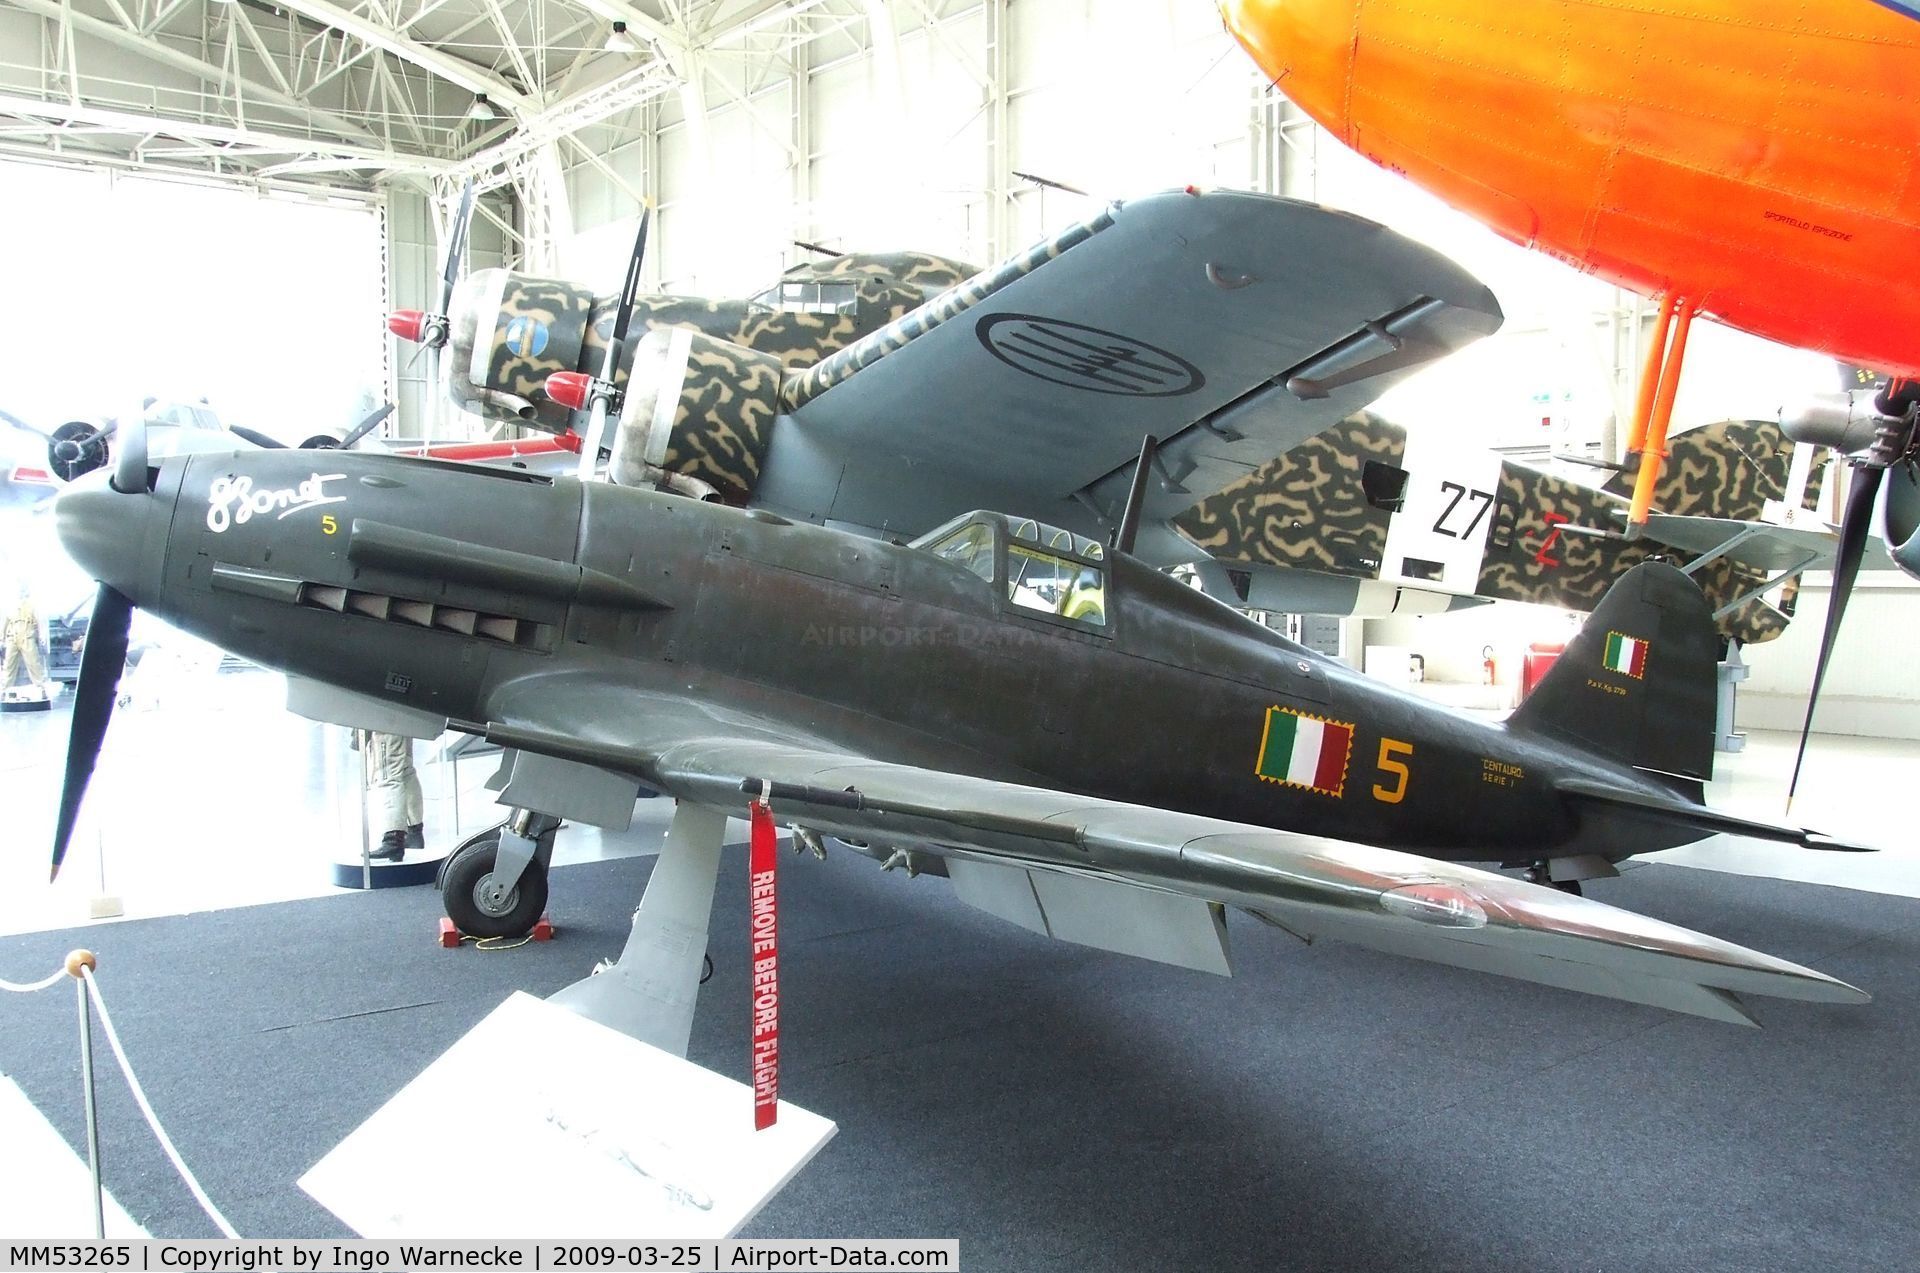 MM53265, Fiat G-59-4A C/N 74, FIAT G.55 Centauro - rebuilt from a FIAT G.59 from 1978 to 2002 - at the Museo storico dell'Aeronautica Militare, Vigna di Valle